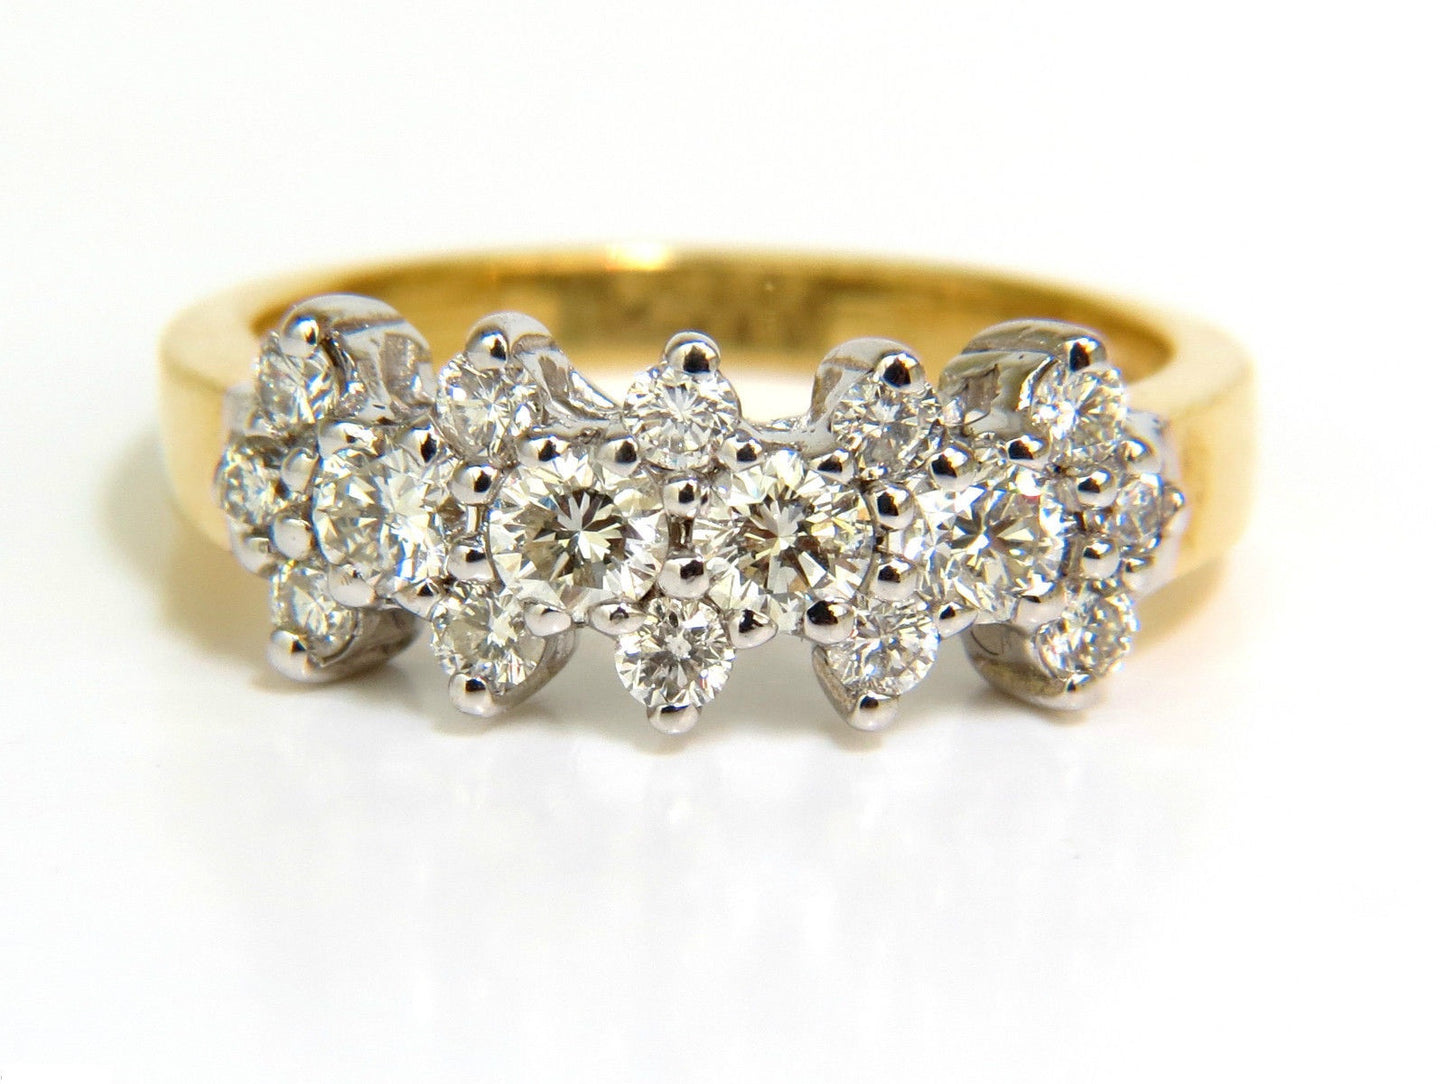 18KT 1.00CT DIAMONDS CLUSTER BAND RING EXCELLENT CUTS